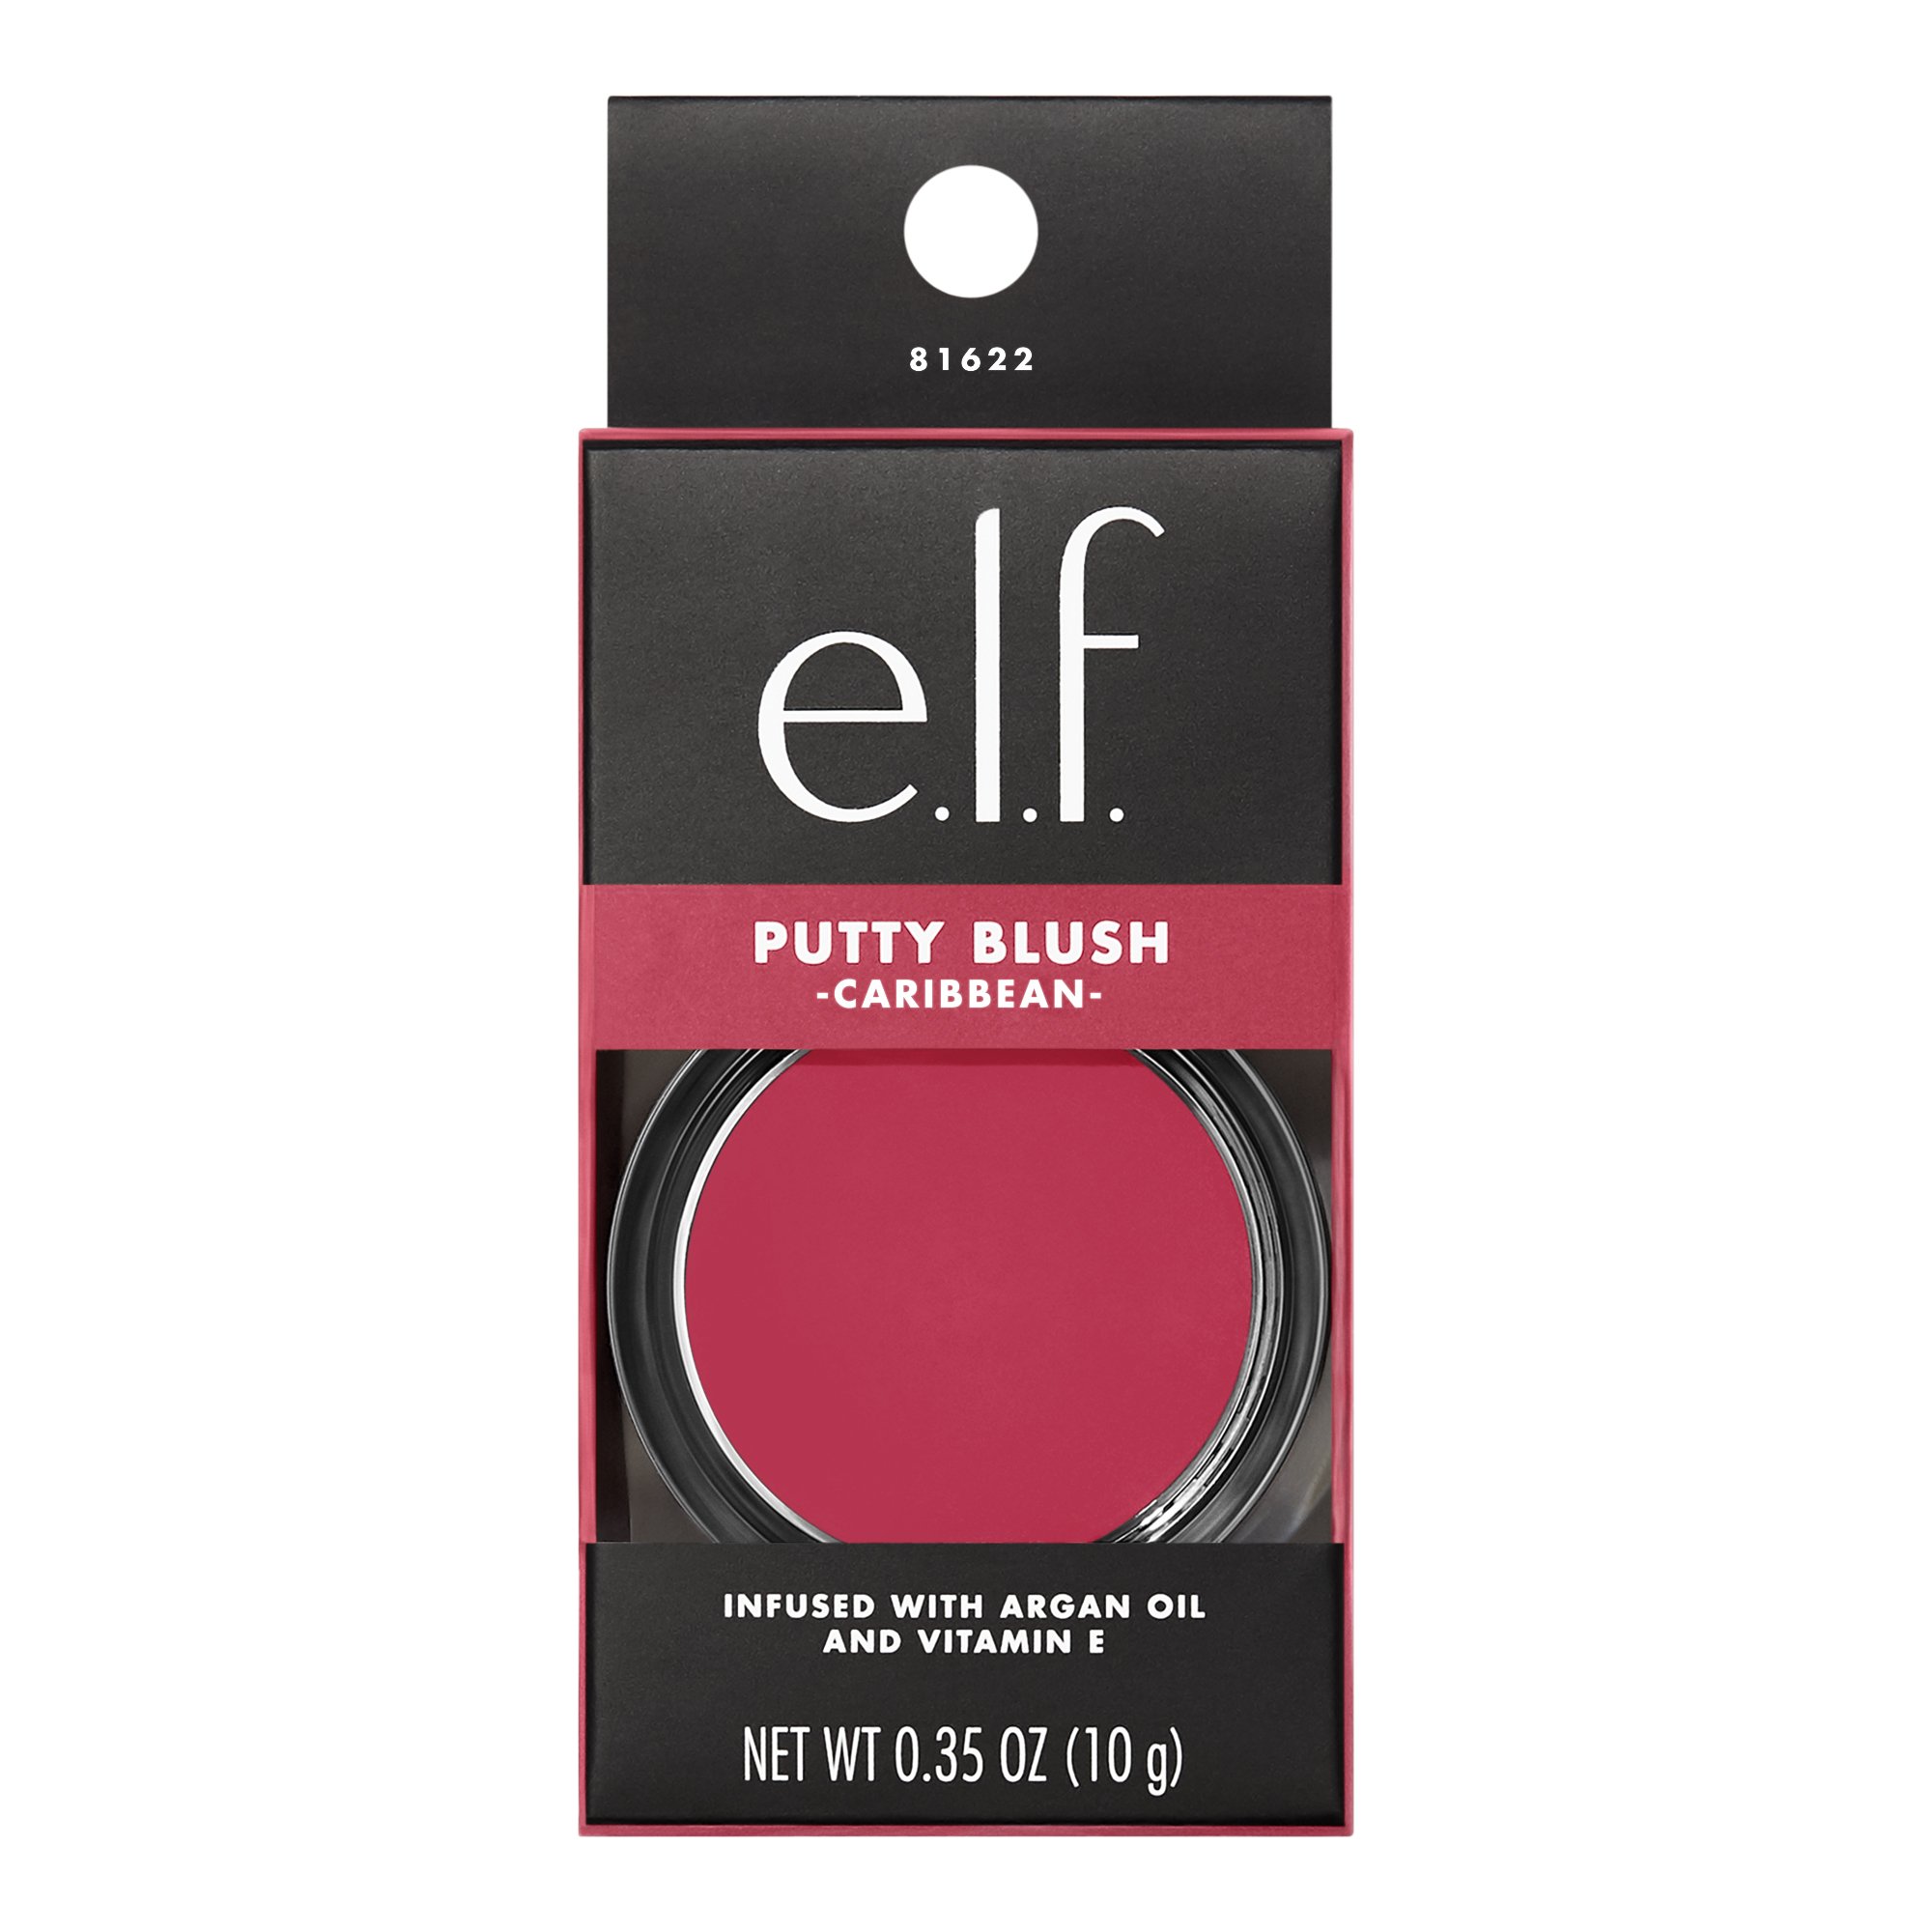 e.l.f. Putty Blush in deep pink color.